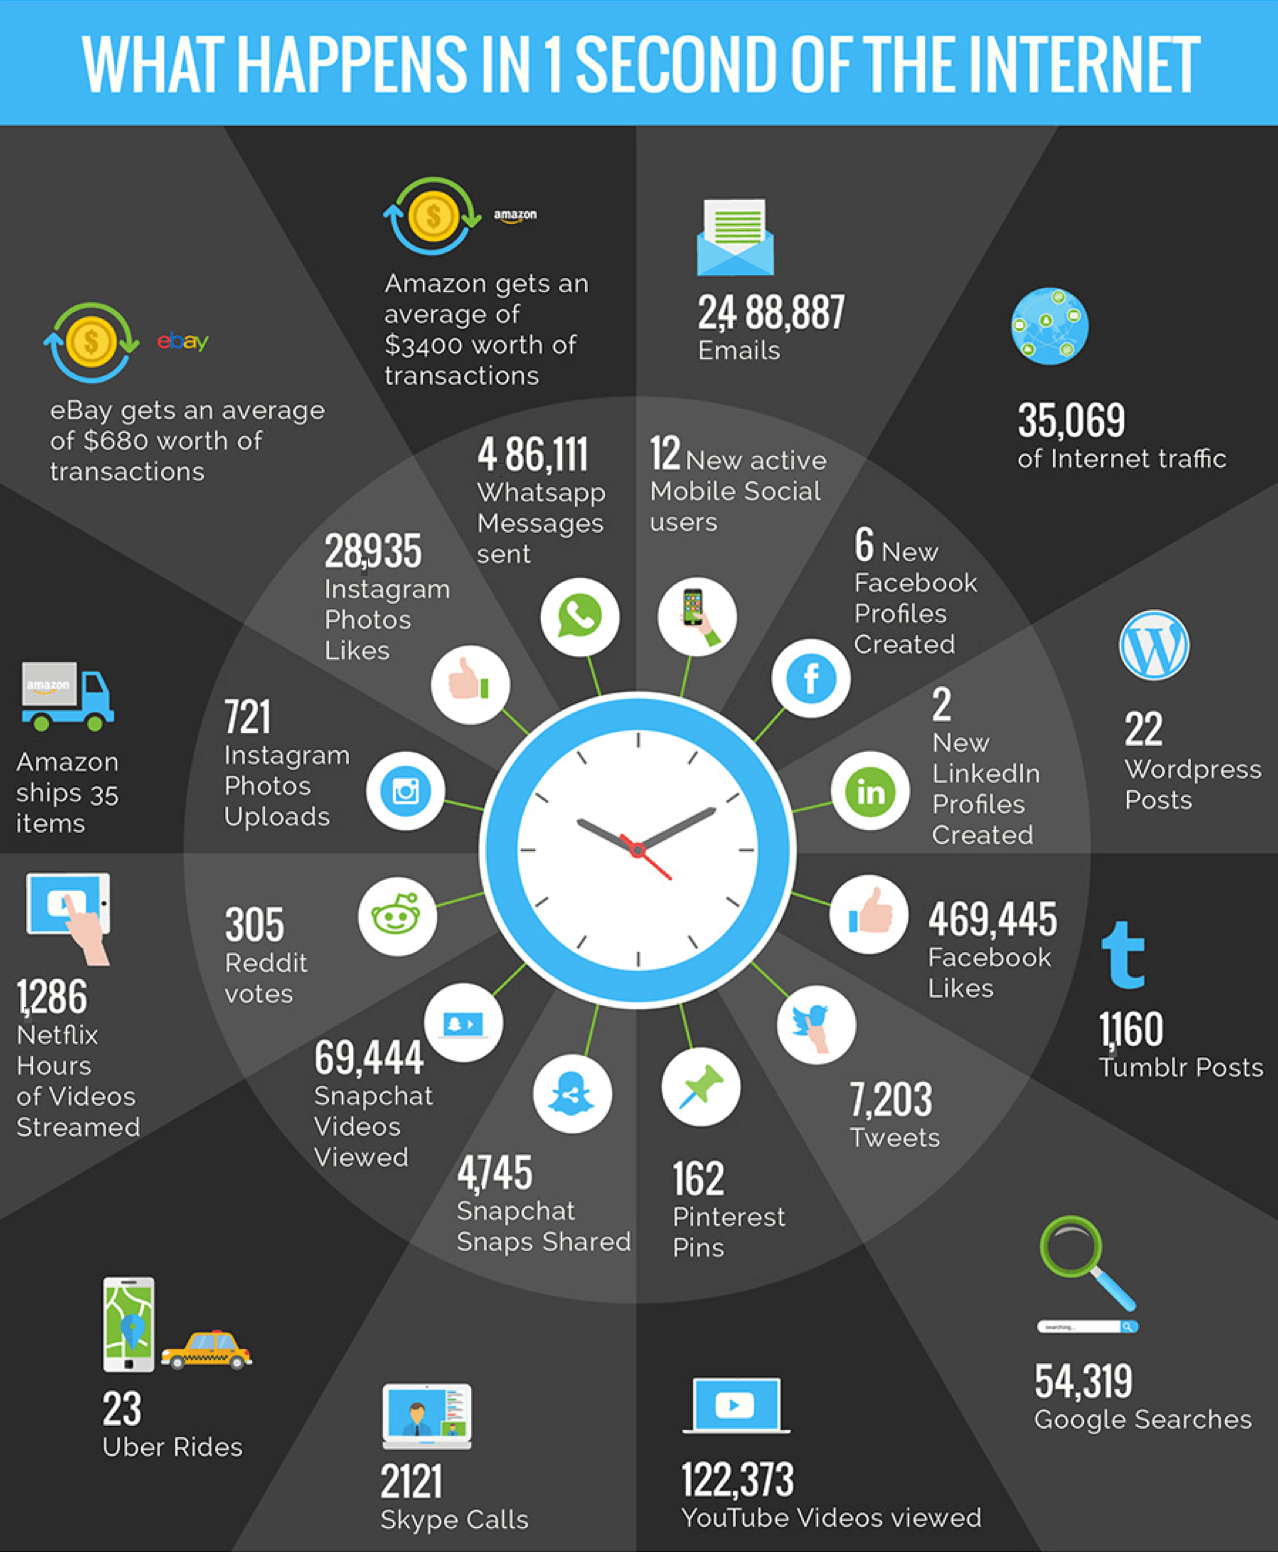 [Infographic] What Happens in 1 Second of the Internet?